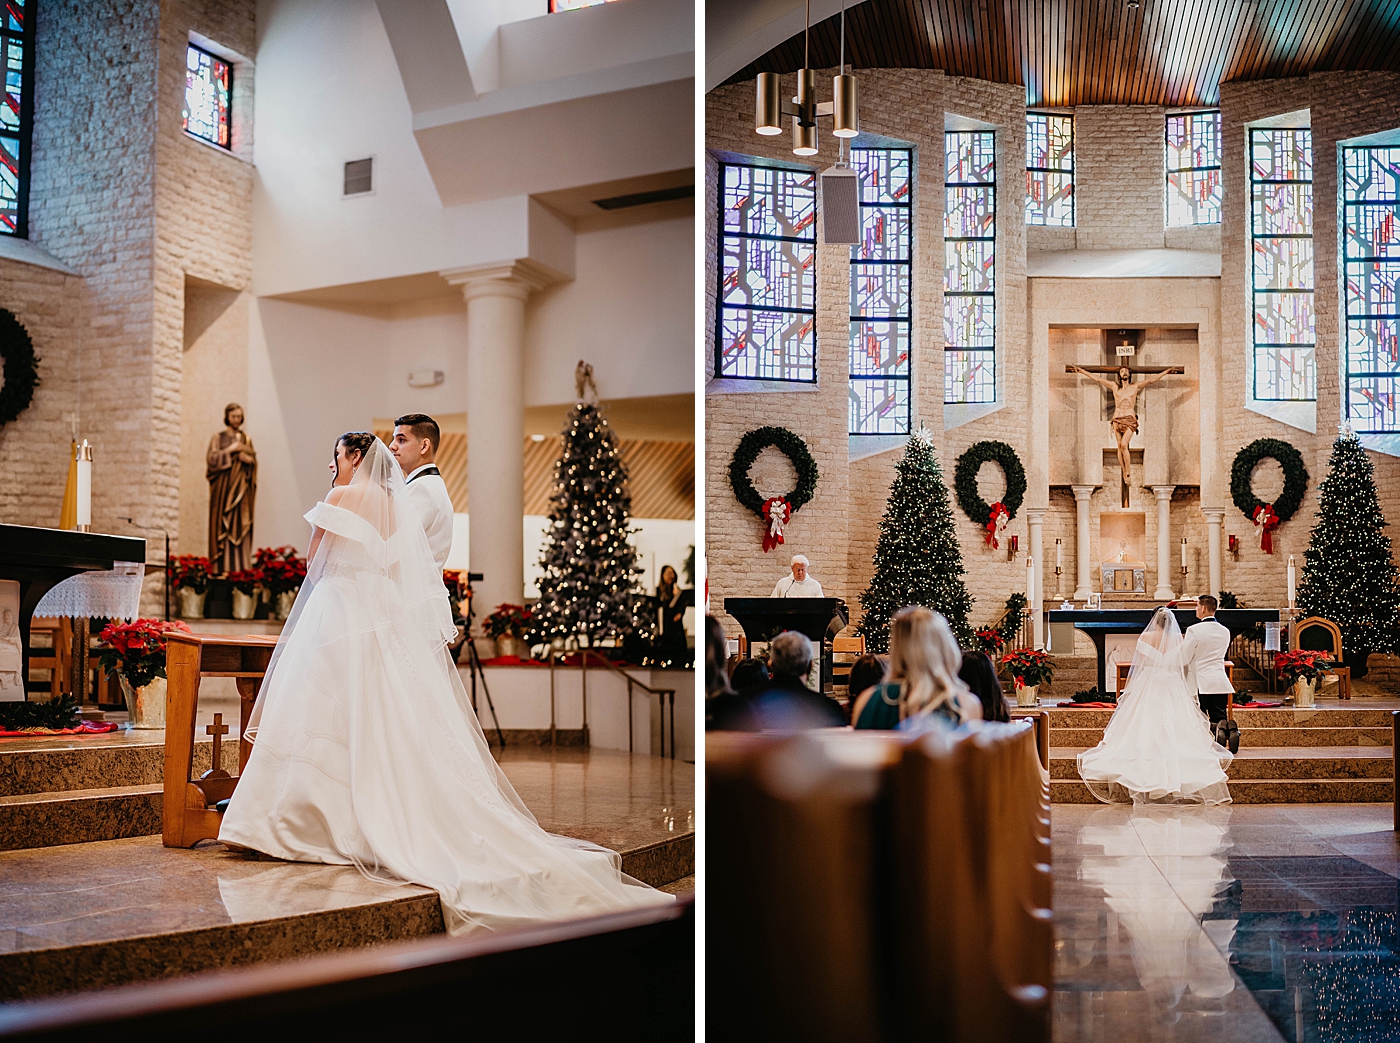 Bride and Groom at the alter Homily Lavan Venue Wedding Photography captured by South Florida Wedding Photographer Krystal Capone Photography